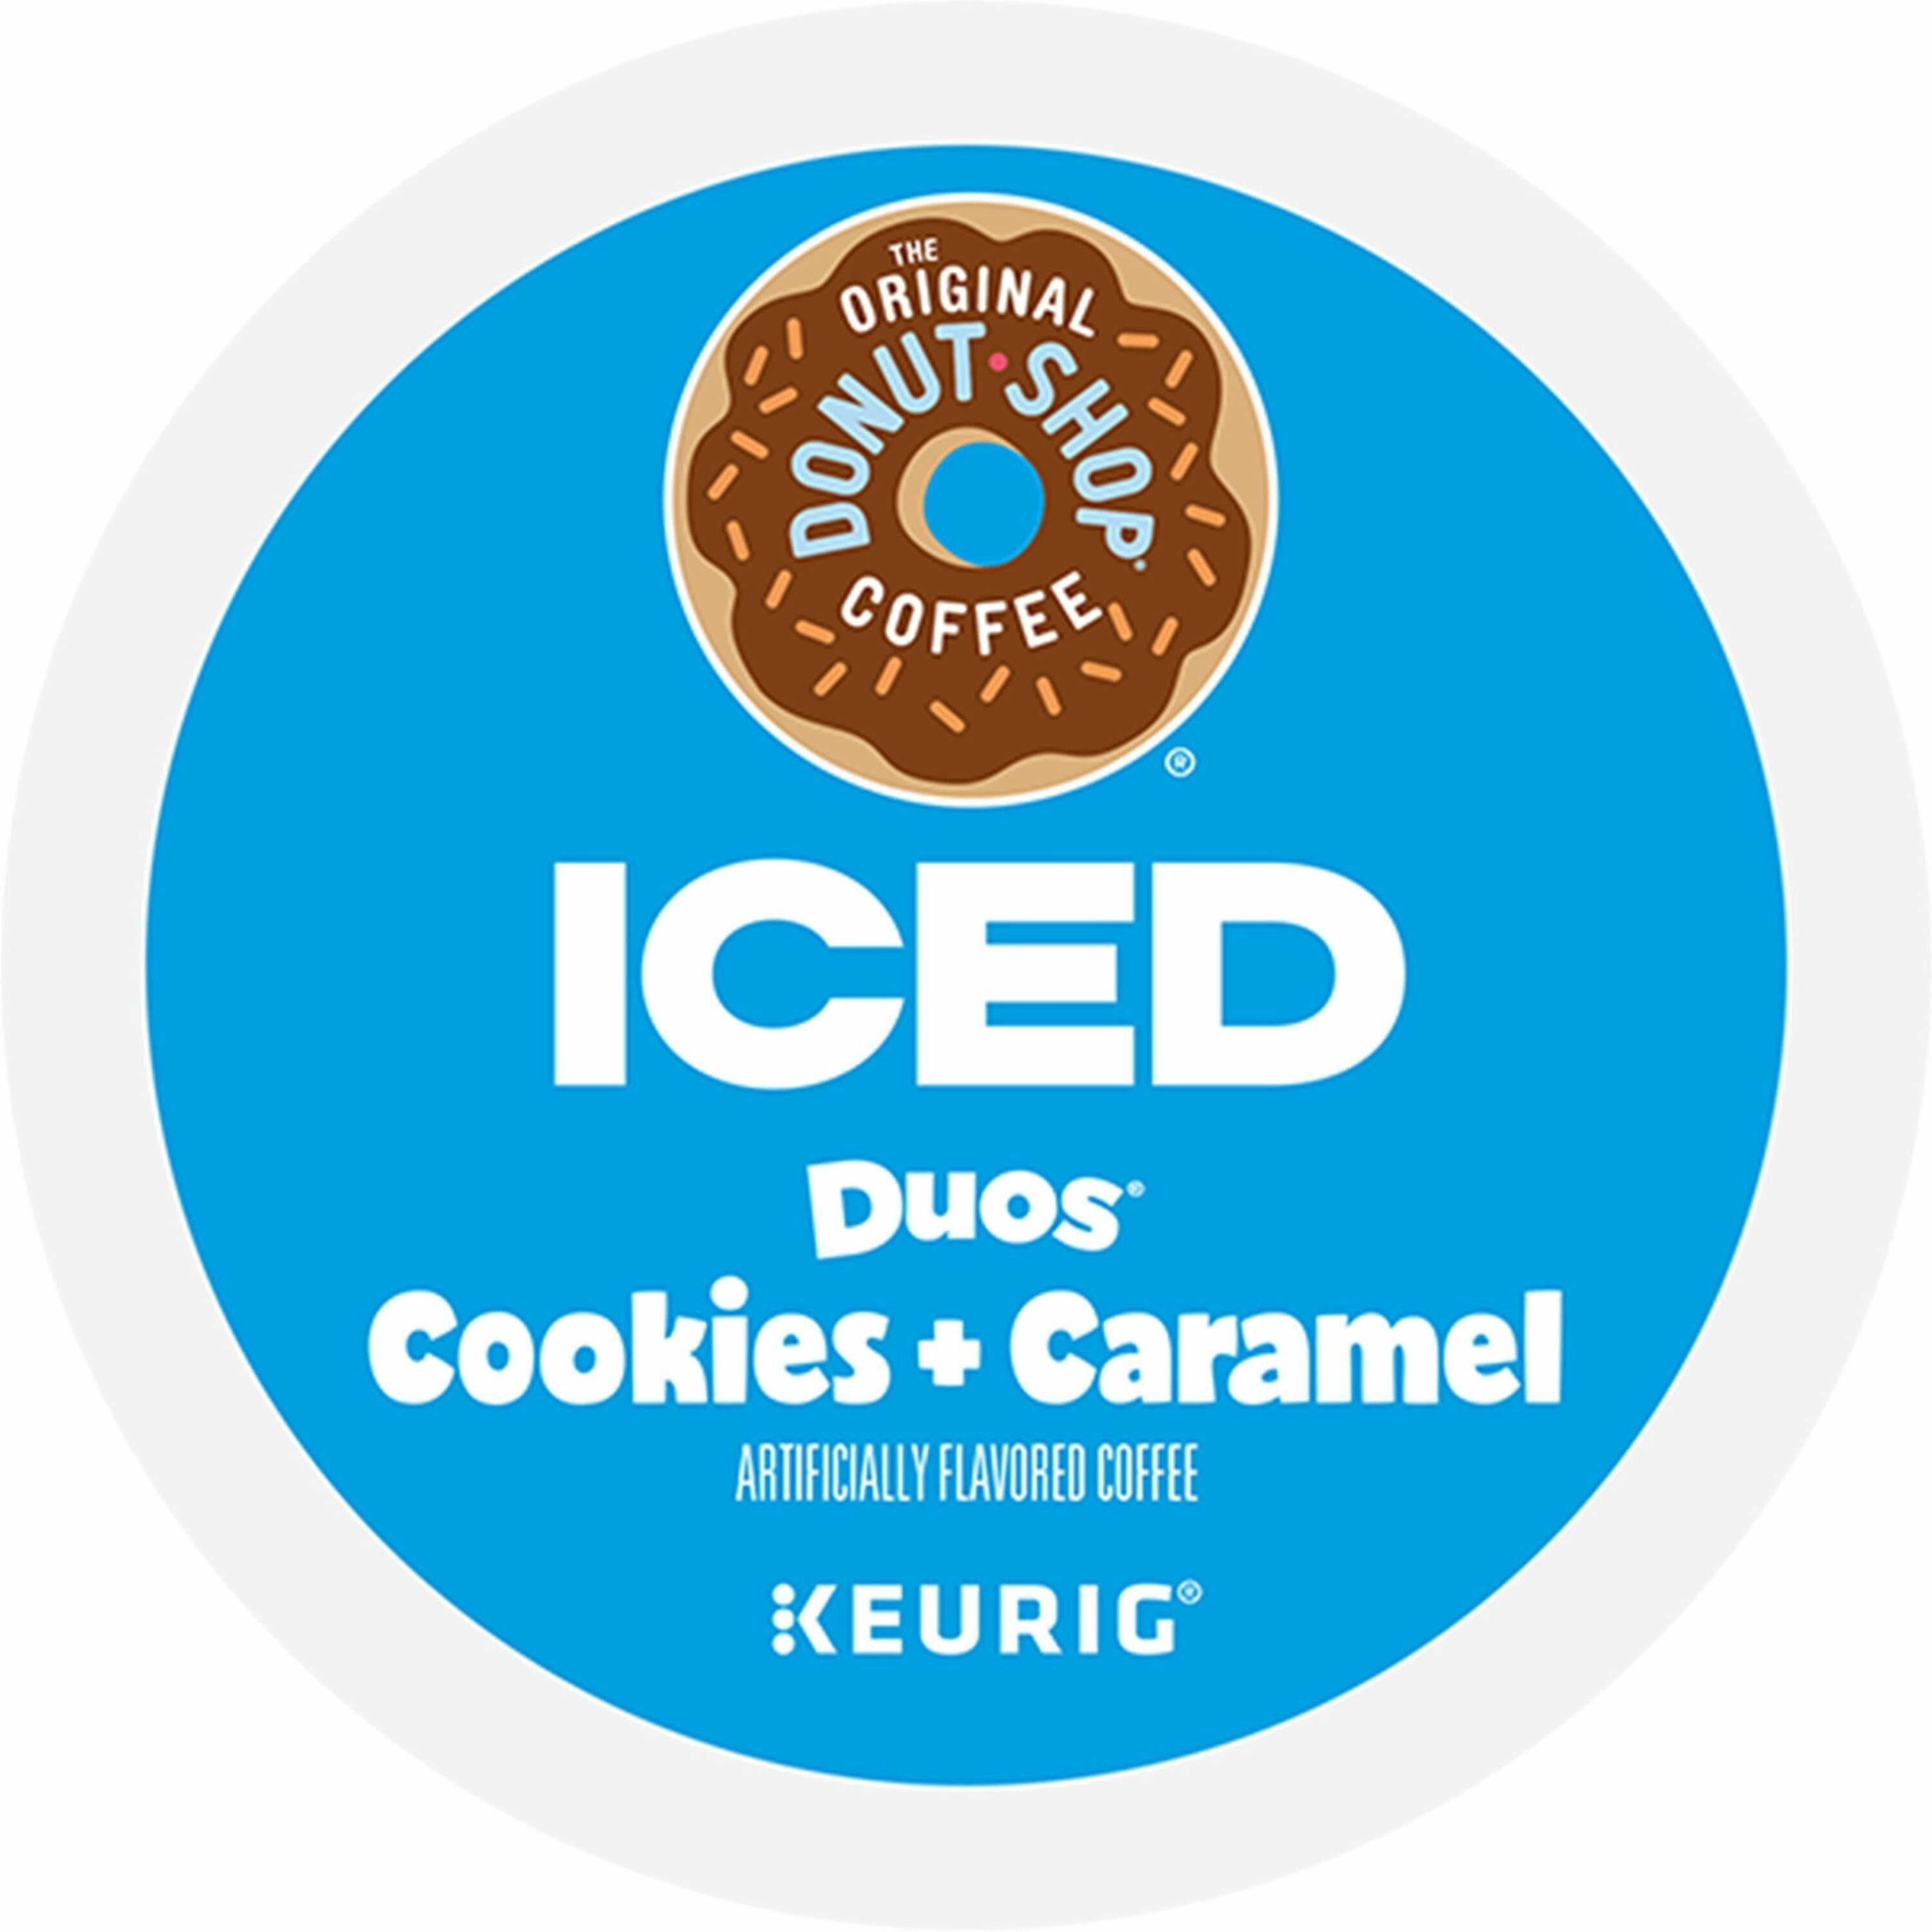 The Original Donut Shop K-Cup Iced Duos Cookies and Caramel Coffee - Compatible with Keurig Brewer - Medium - 24 / Box - 1